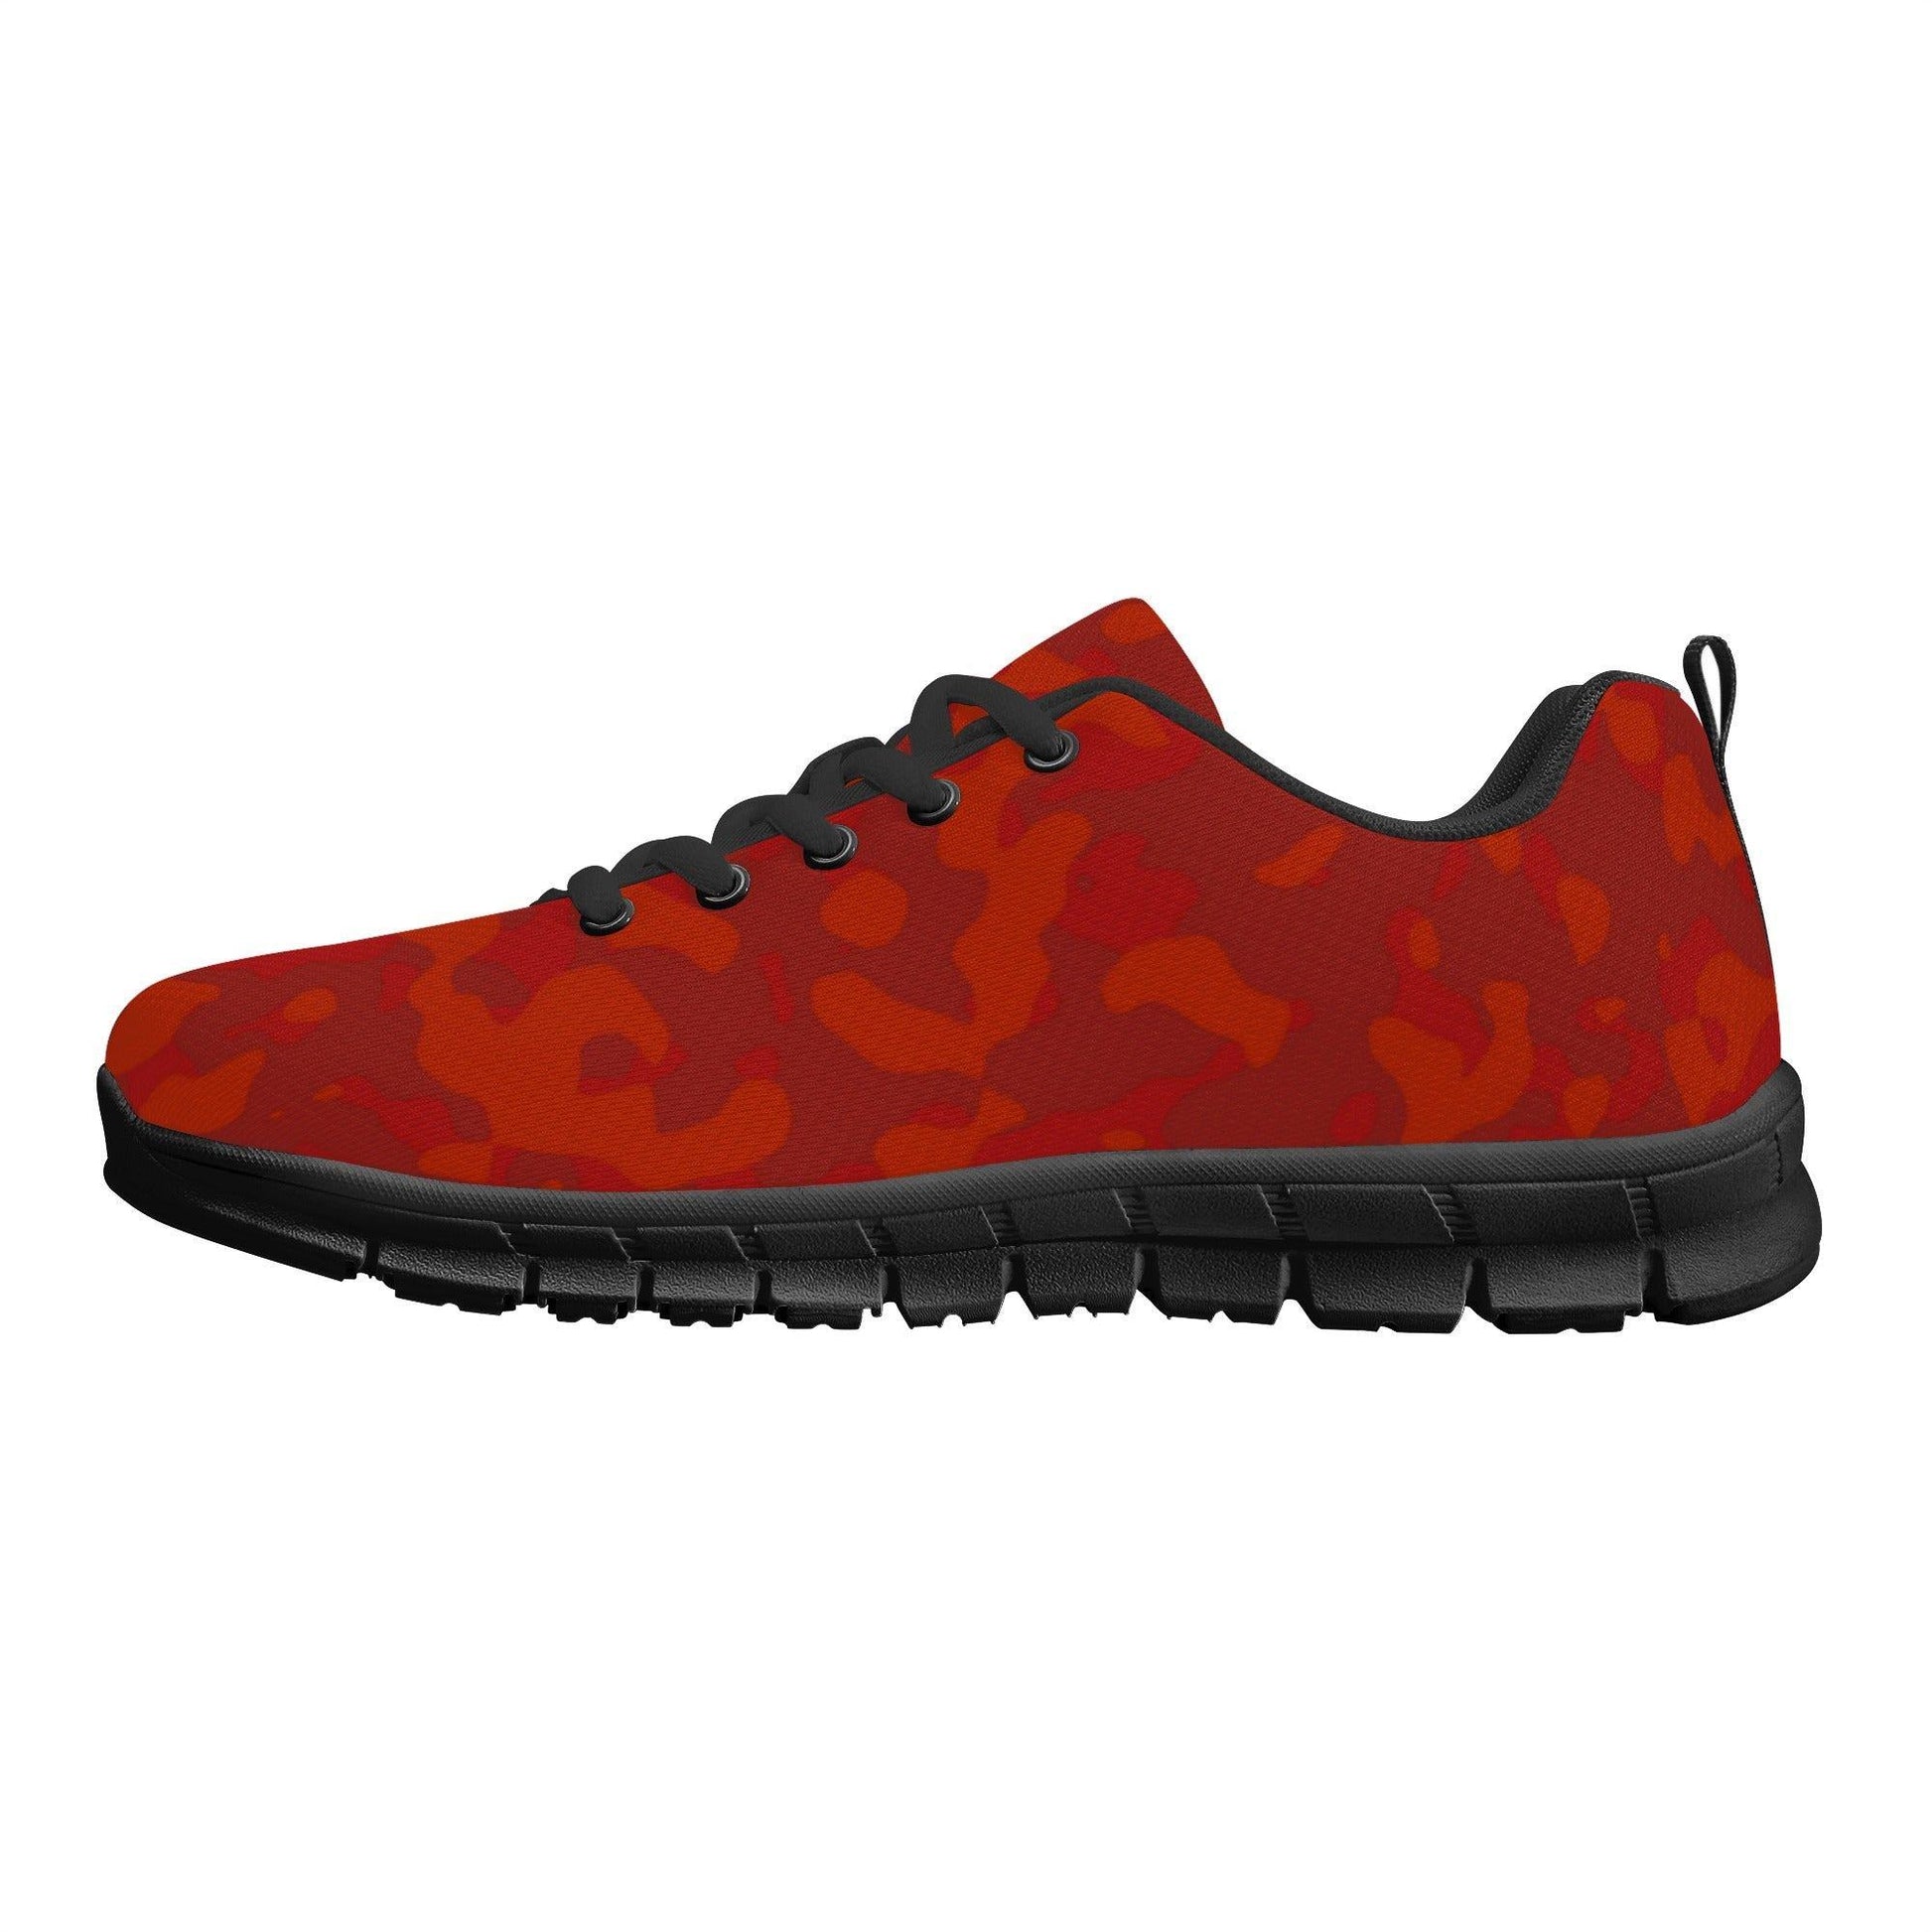 Red Camouflage Damen Laufschuhe -- Red Camouflage Damen Laufschuhe - undefined Laufschuhe | JLR Design